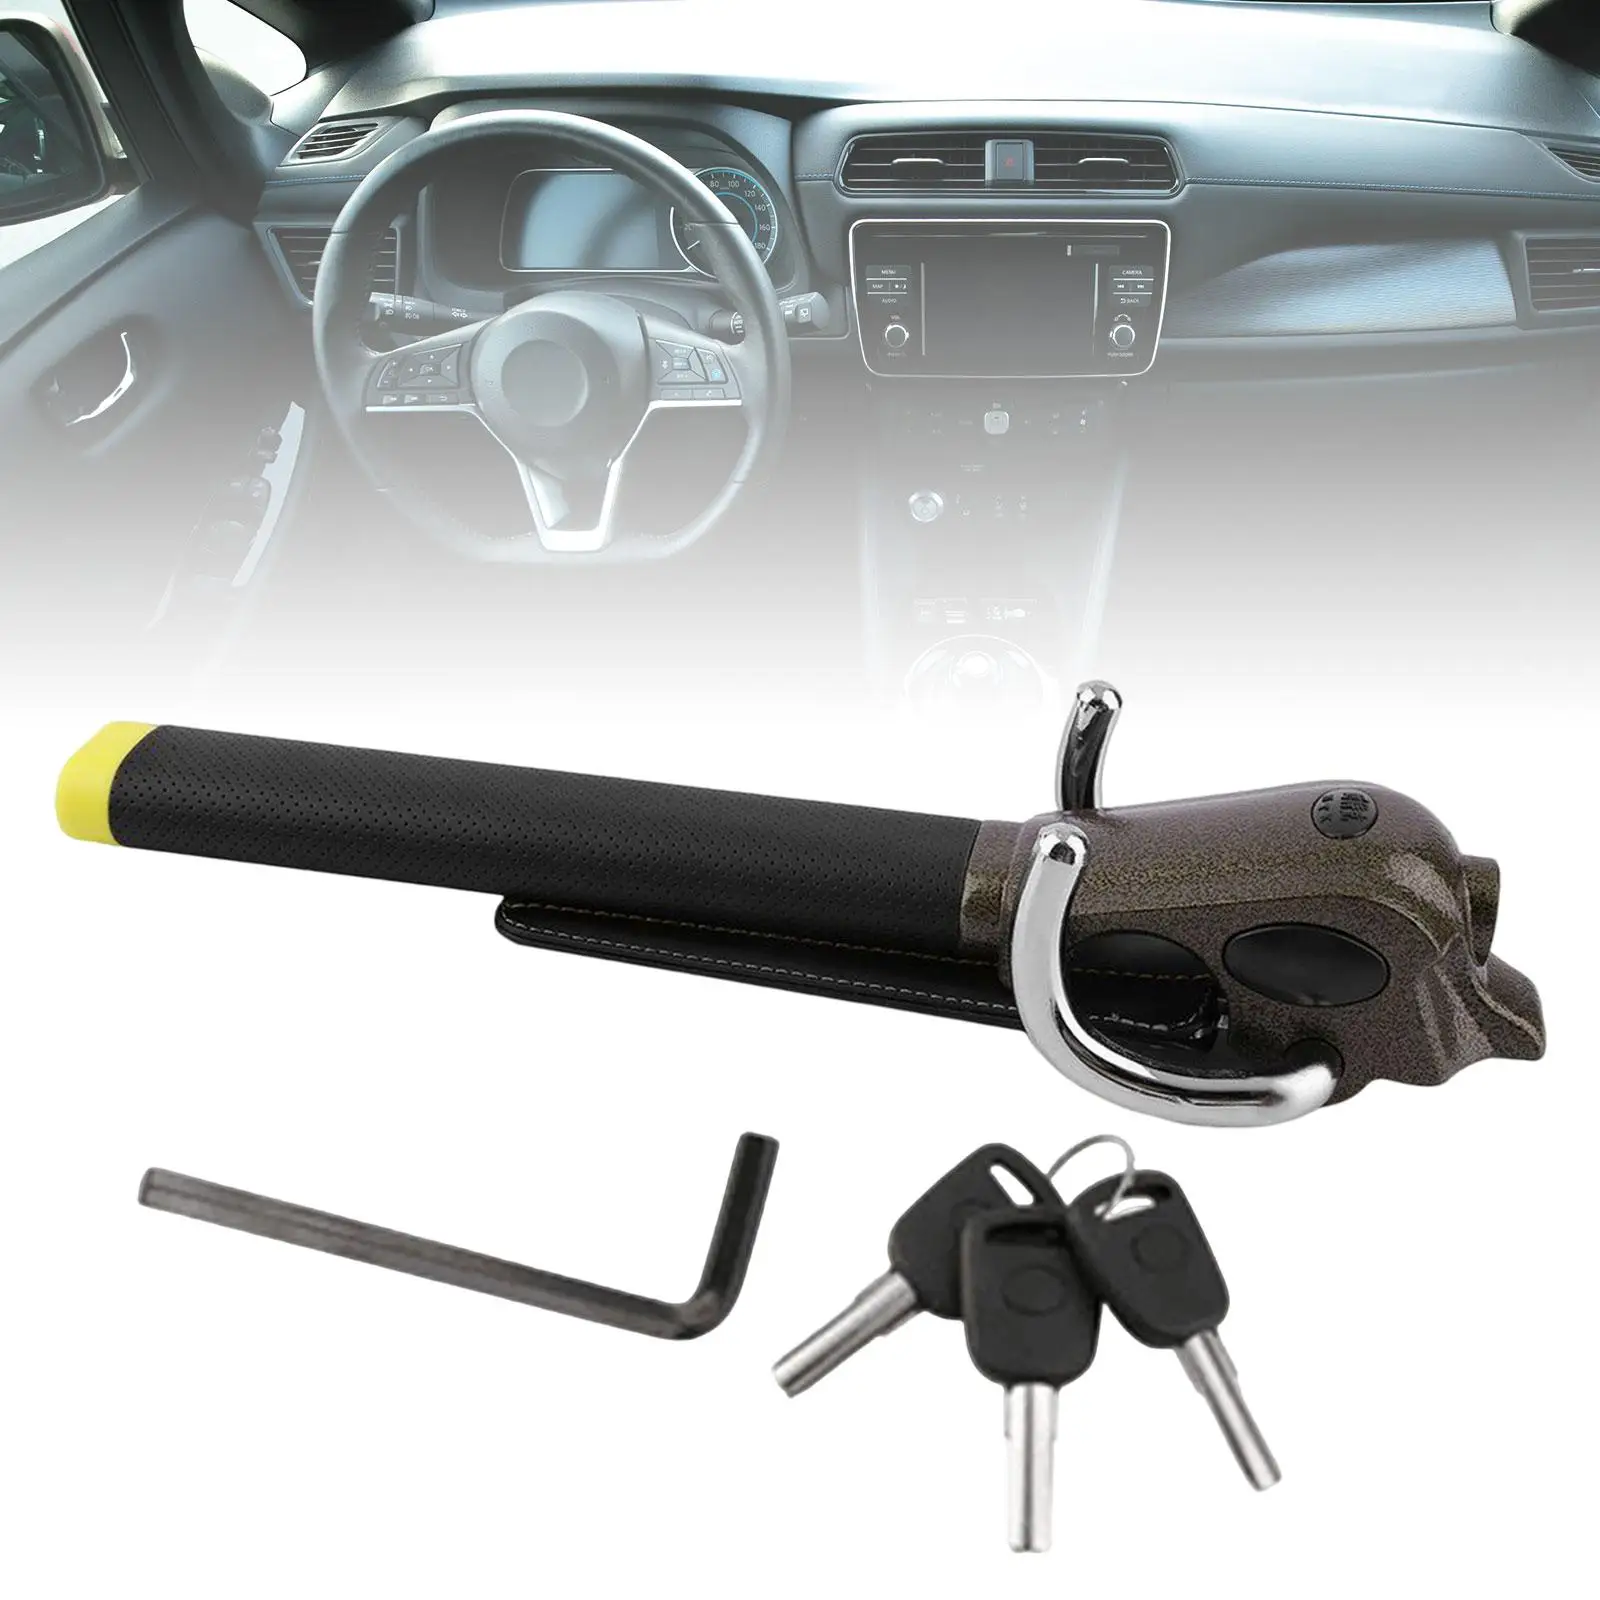 Steering Wheel Lock with 3 Keys Vehicles Lock Accessories for Cars SUV